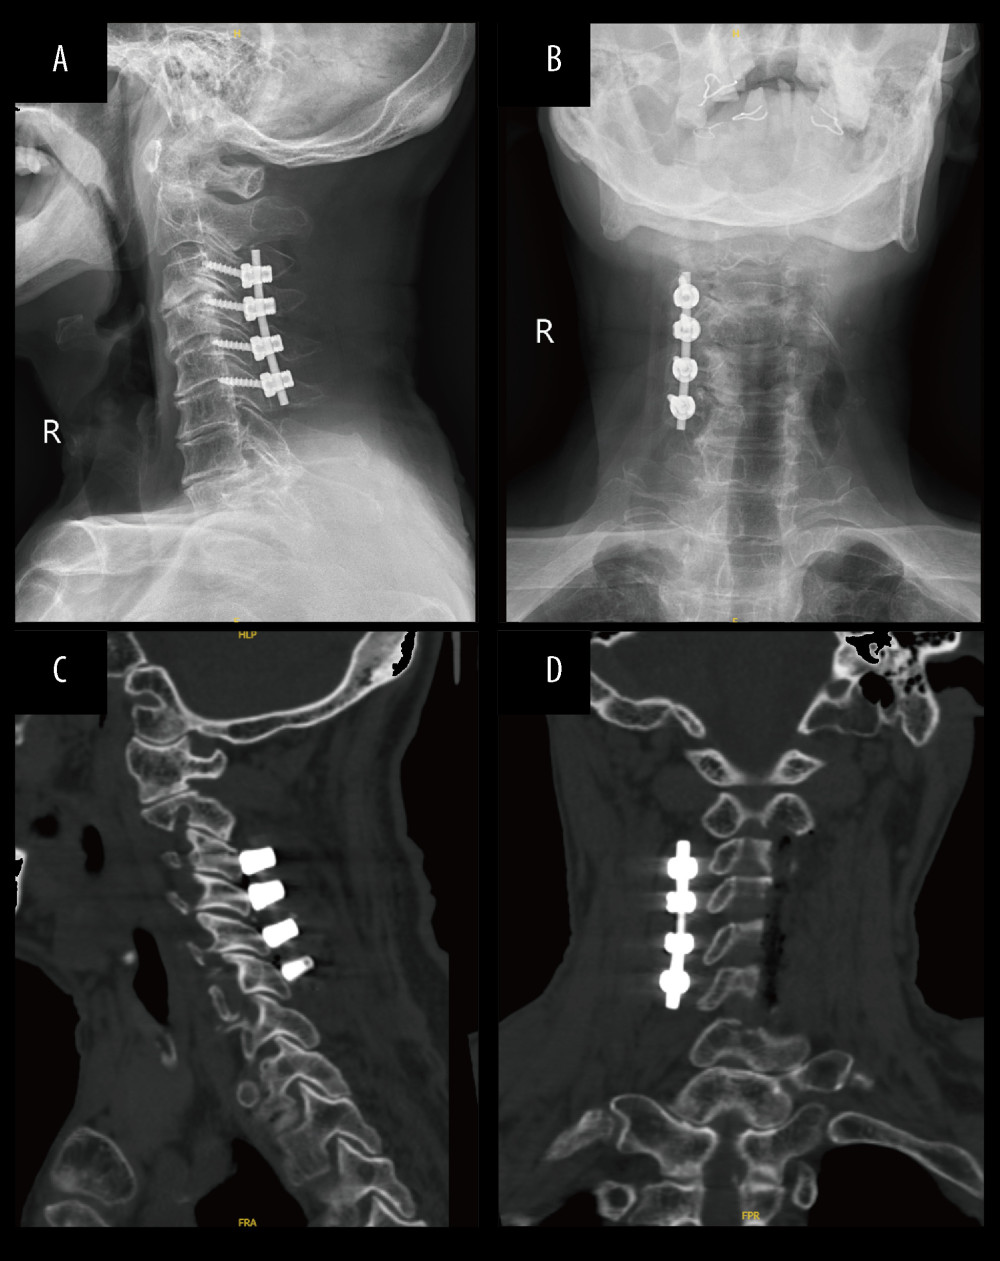 Postoperative cervical X-ray and computed tomography scans after the operation. Posterior C3–C6 expansive open-door cervical laminoplasty with lateral mass screw insertion and C2 and C7 decompression surgeries were performed. (A, B) X-ray scans 5 days after operation. (C, D) Computed tomography scans 5 days after the operation.